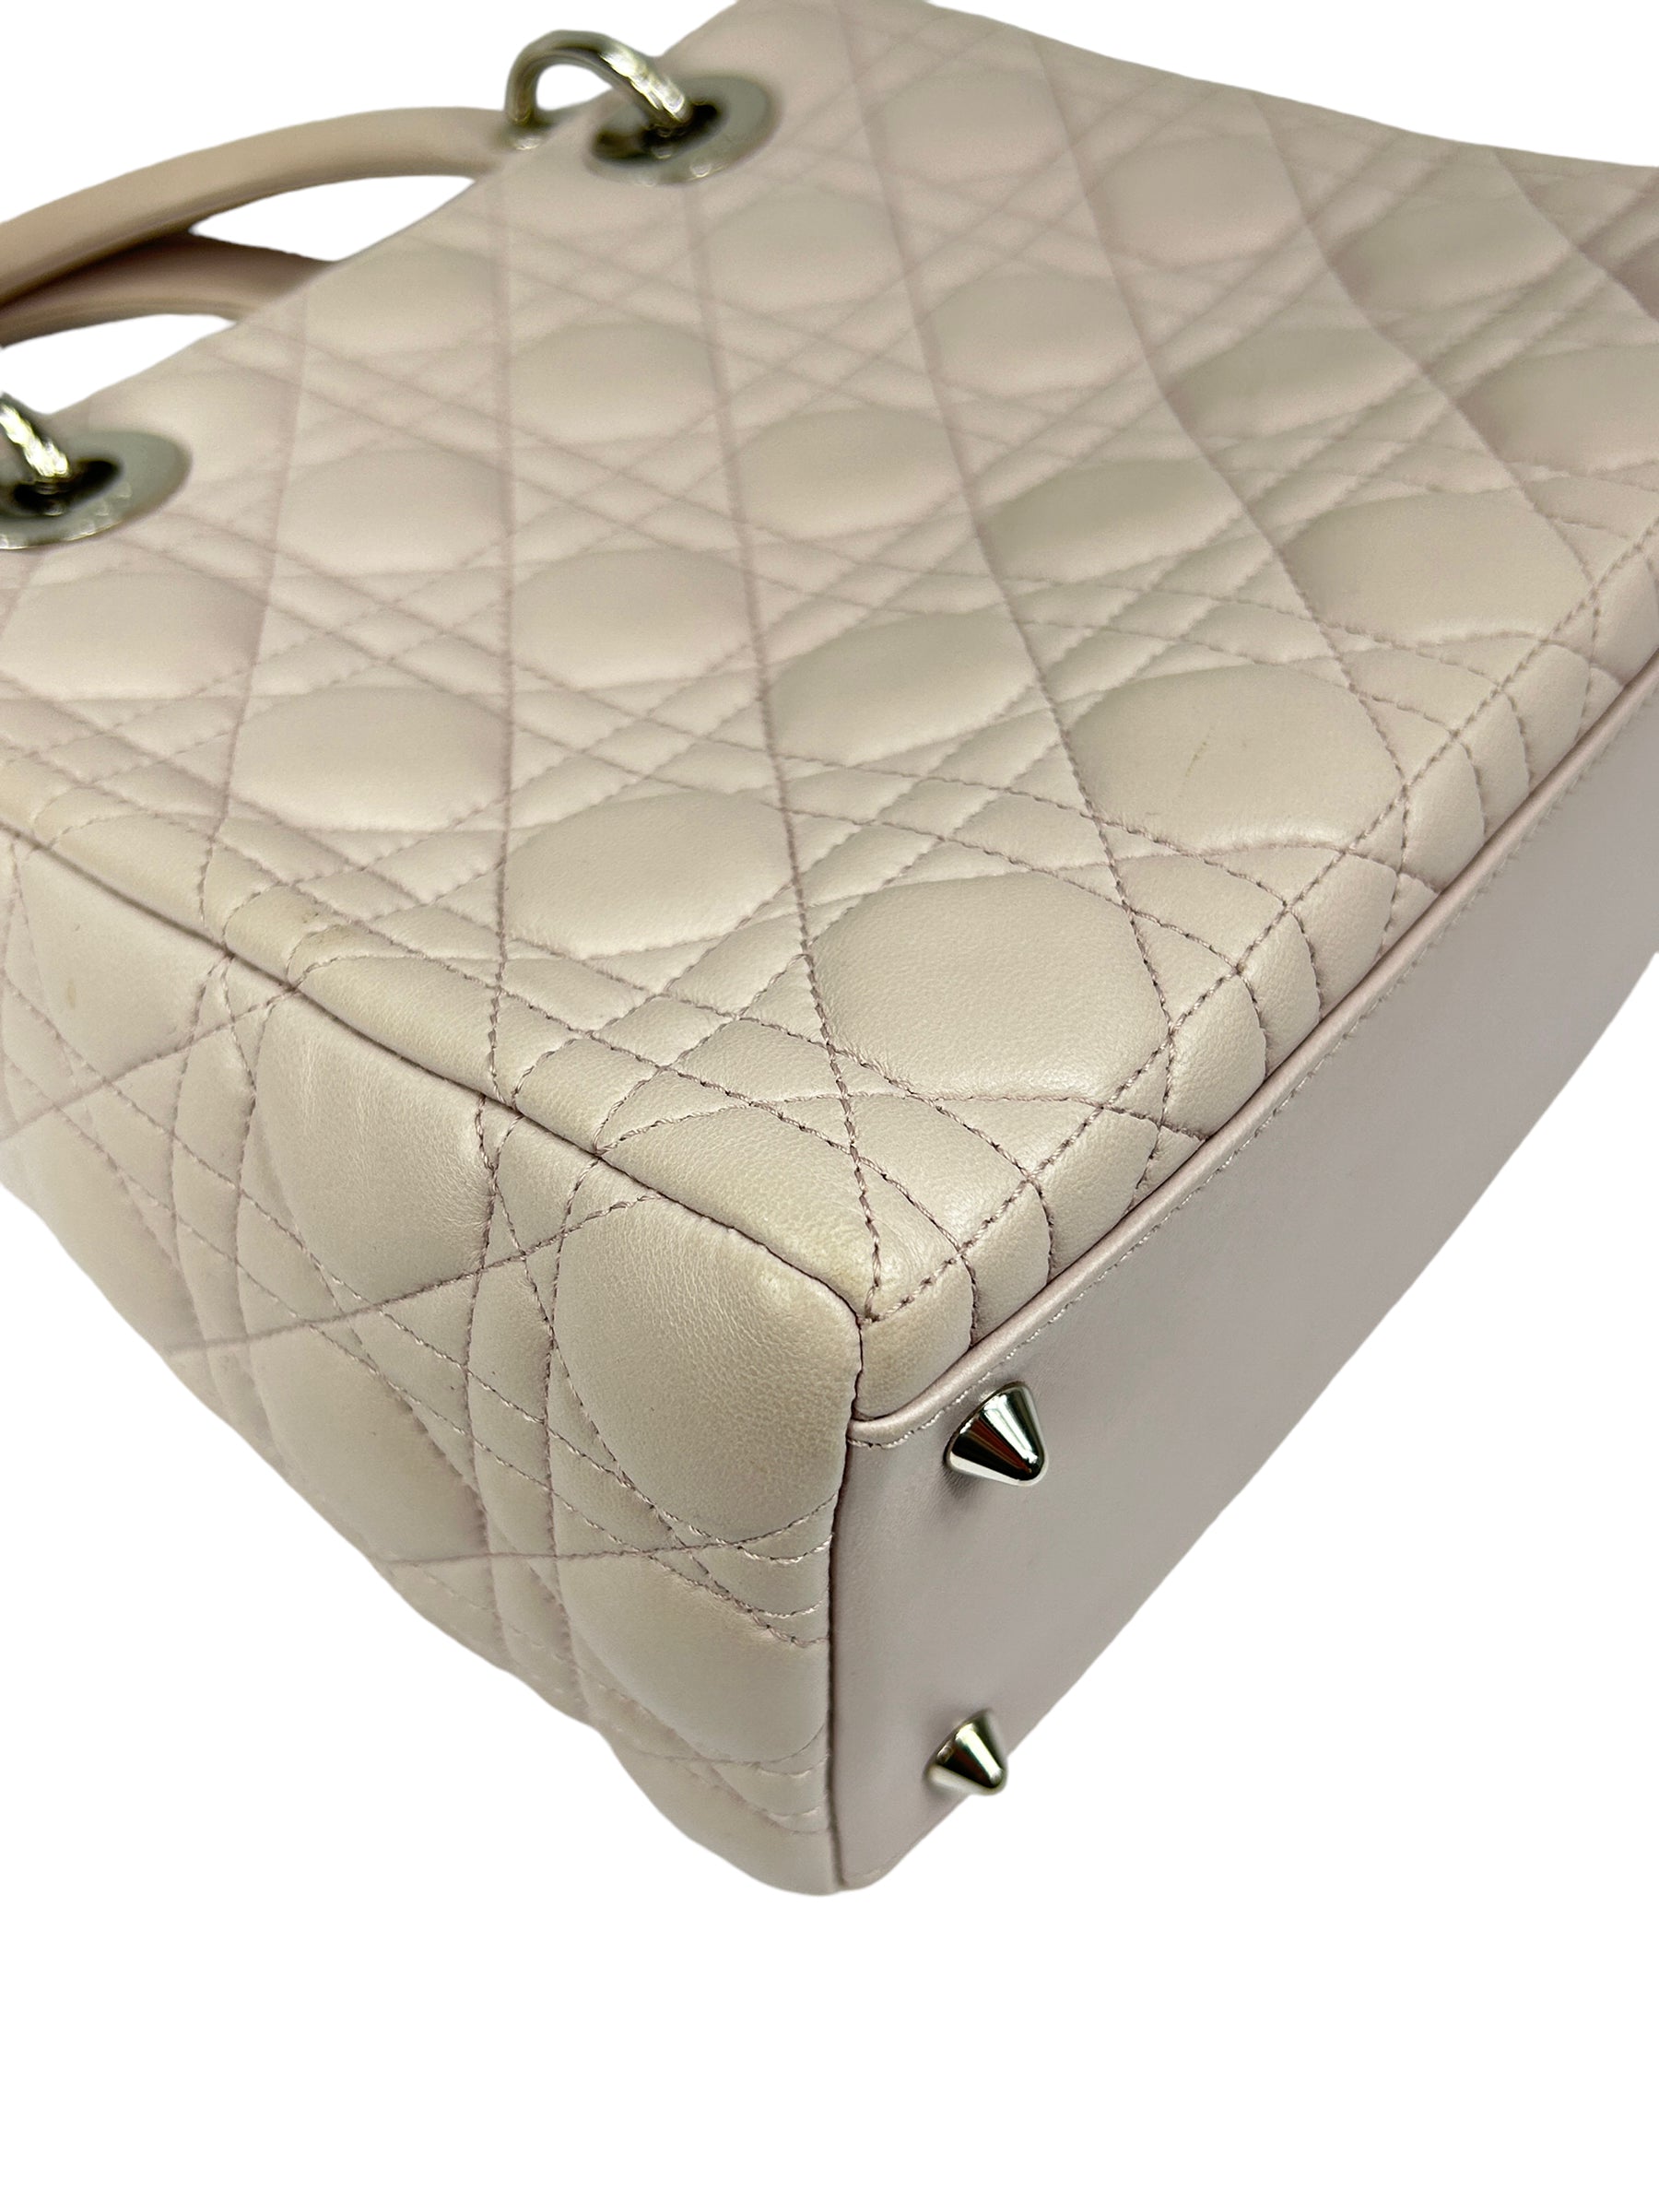 Quilted Medium Light Pink Lambskin Leather Lady Dior w/SHW